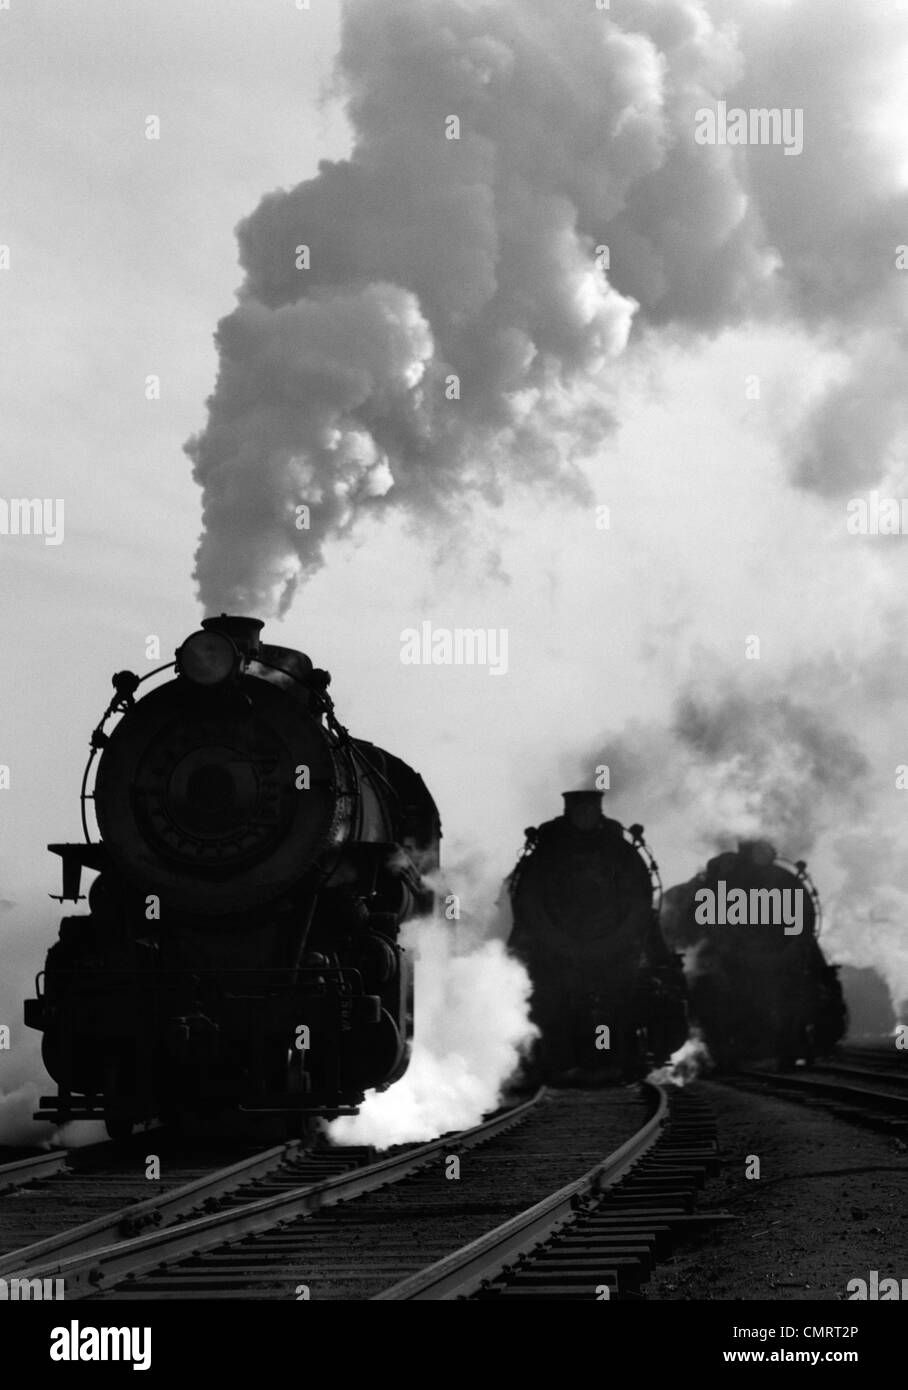 1930s 1940s HEAD-ON VIEW OF THREE STEAM ENGINES SILHOUETTED AGAINST BILLOWING SMOKE AND STEAM OUTDOOR Stock Photo